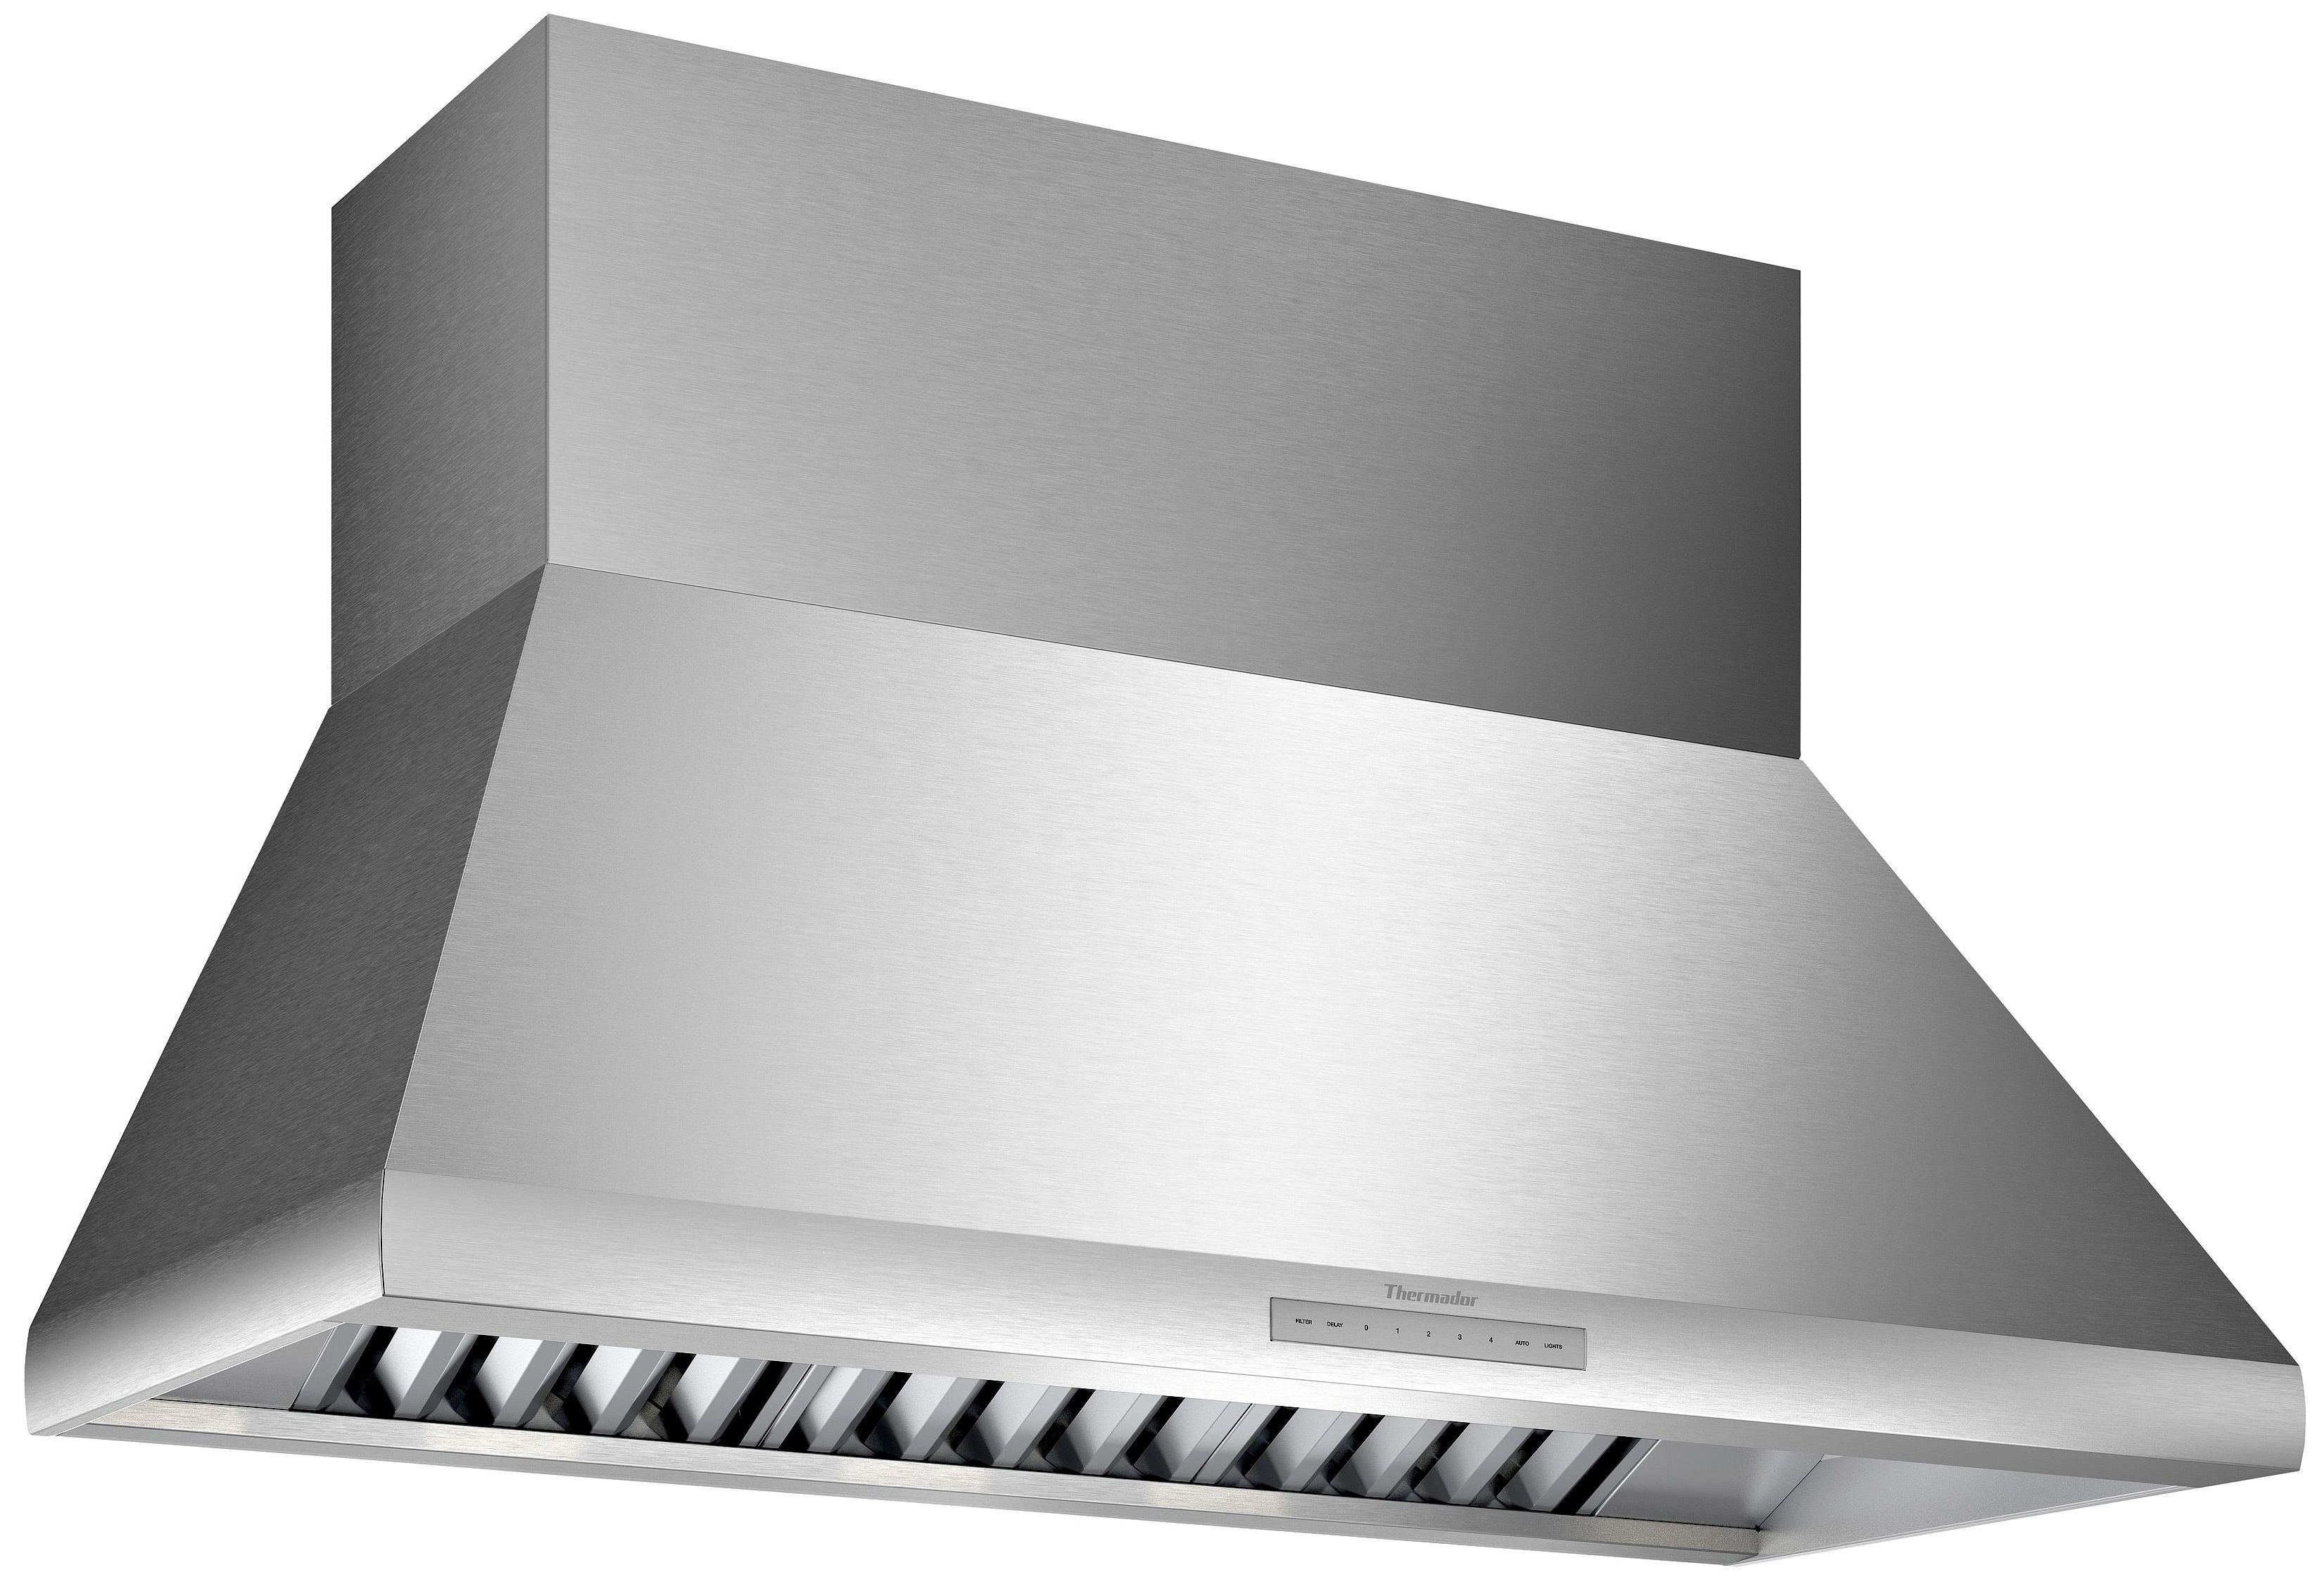 Thermador® Professional 48" Stainless Steel Wall Hood